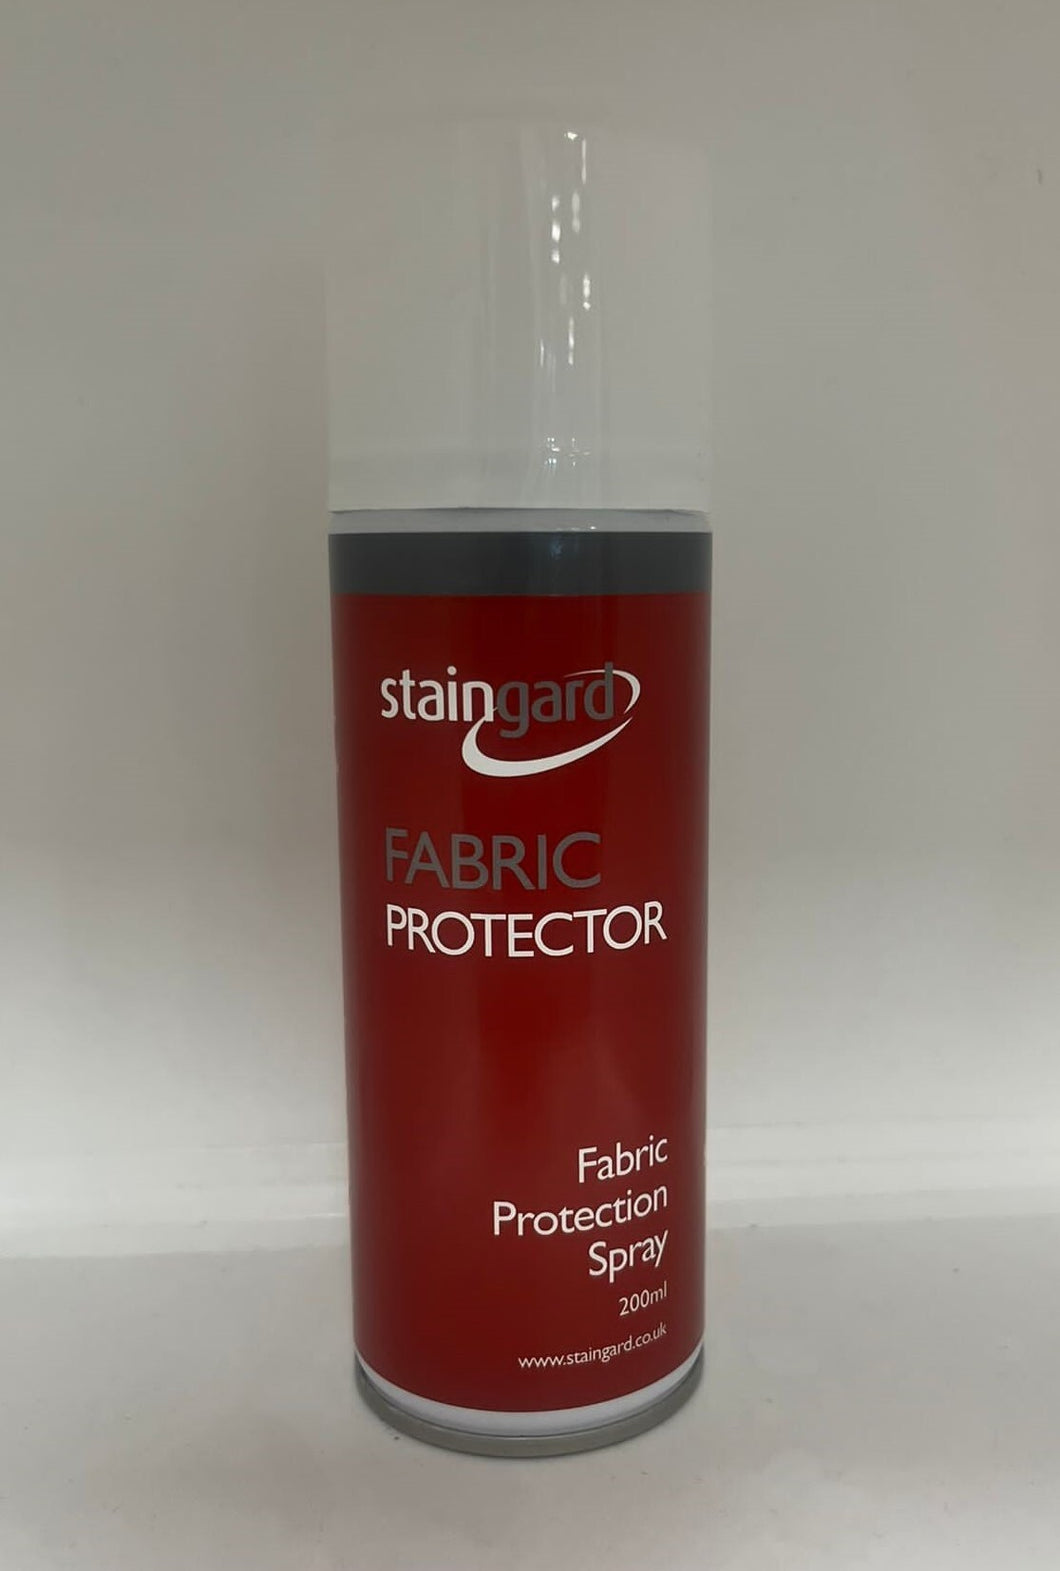 Stainguard Fabric Protector